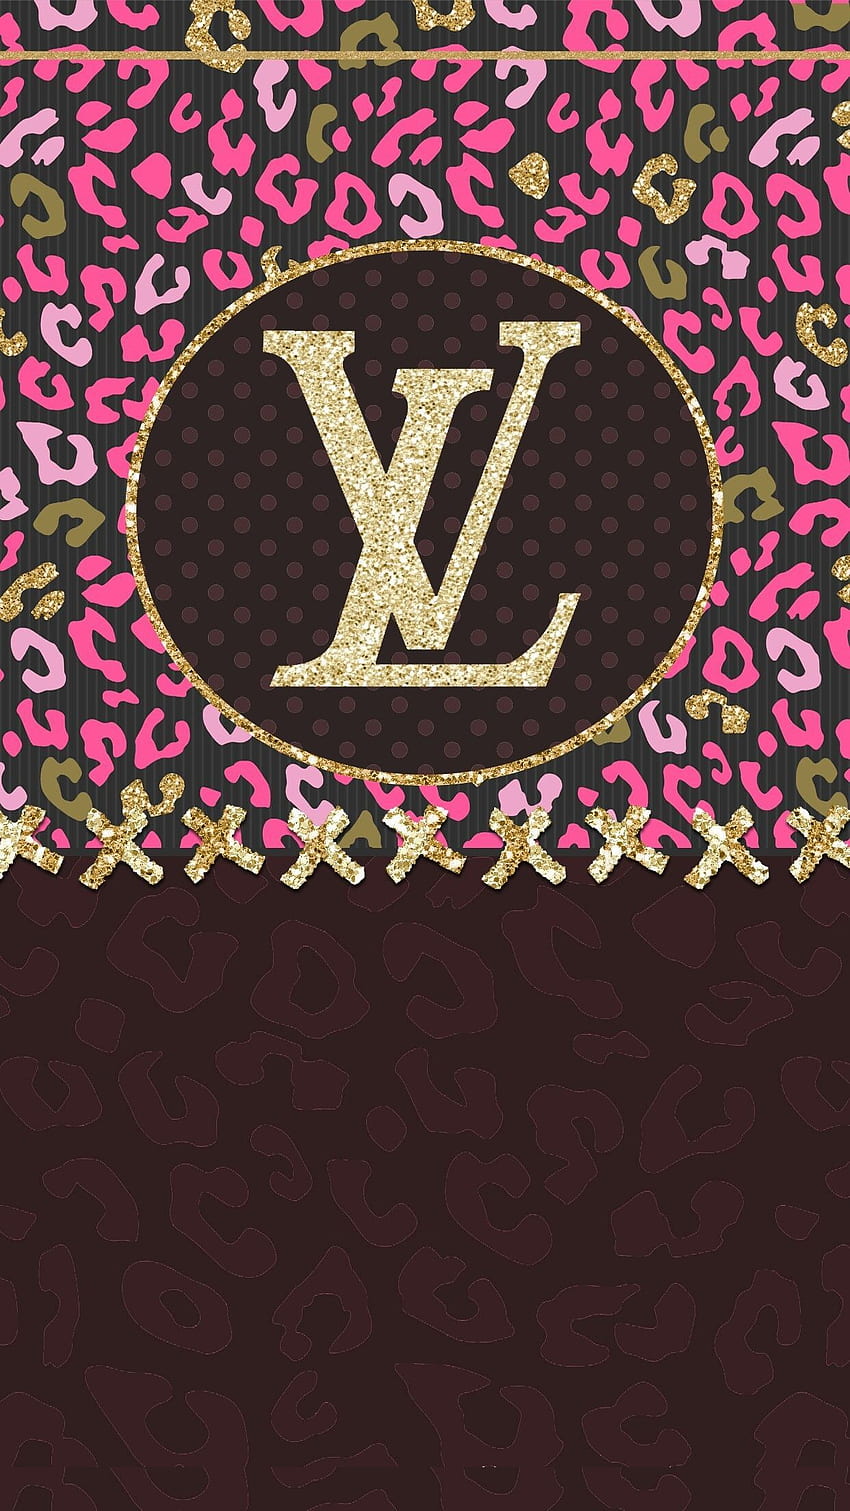 iPhone 7 Wallpapers on X: #louisvuitton fans will just love this #designer  #iPhone7 wallpaper compatible with the #iPhone7PlusRed download:    / X